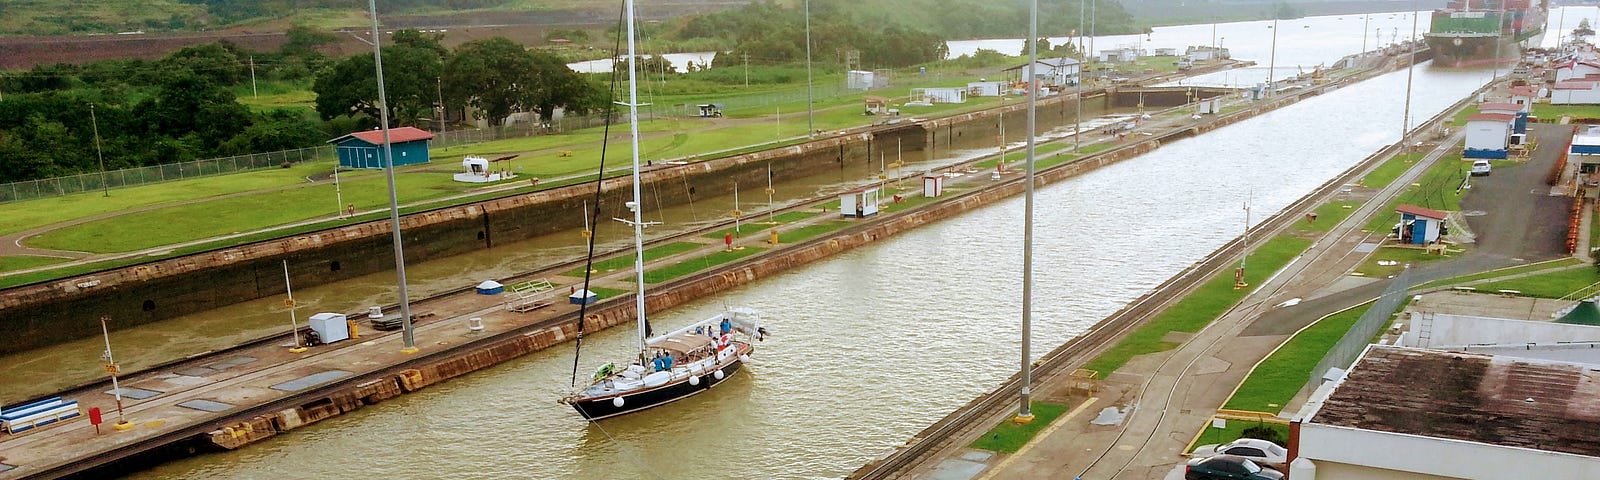 Photo showing a small yacht and a large ship entering the Miraflores Locks, Panama Canal